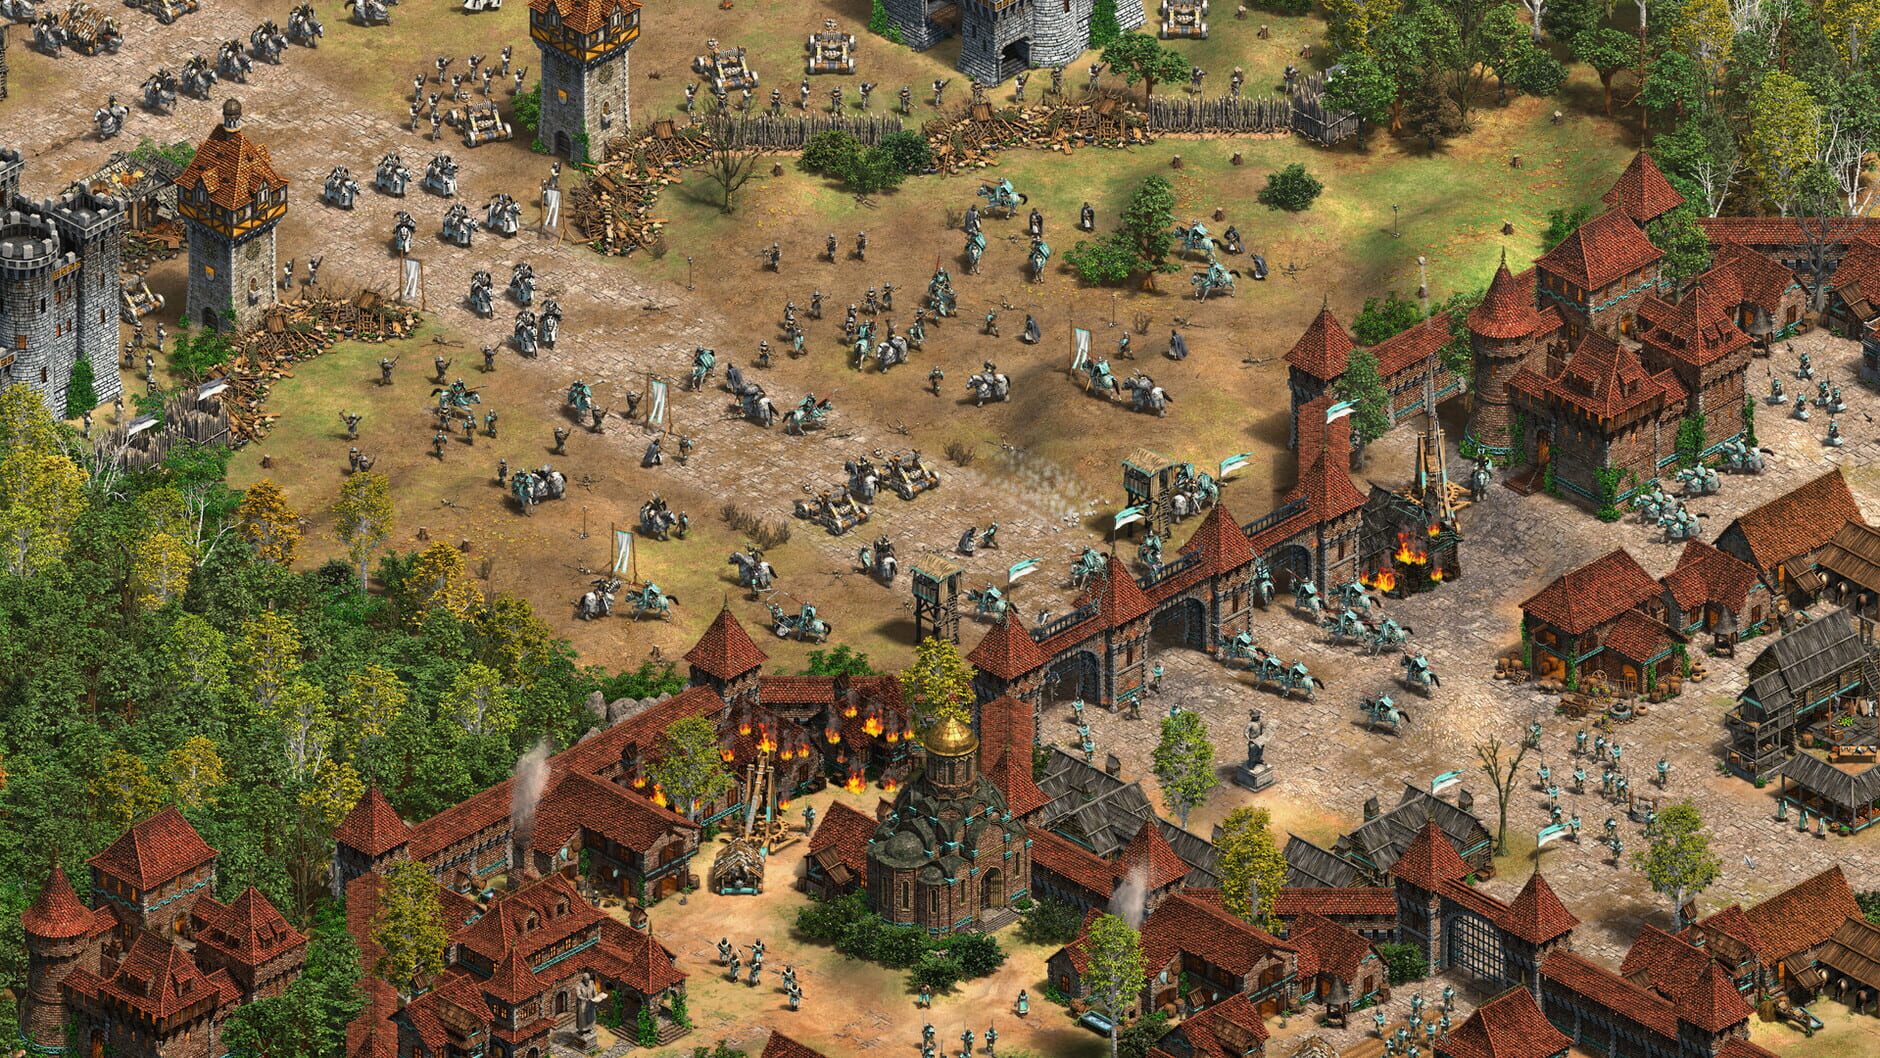 Screenshot for Age of Empires II: Definitive Edition - Dawn of the Dukes